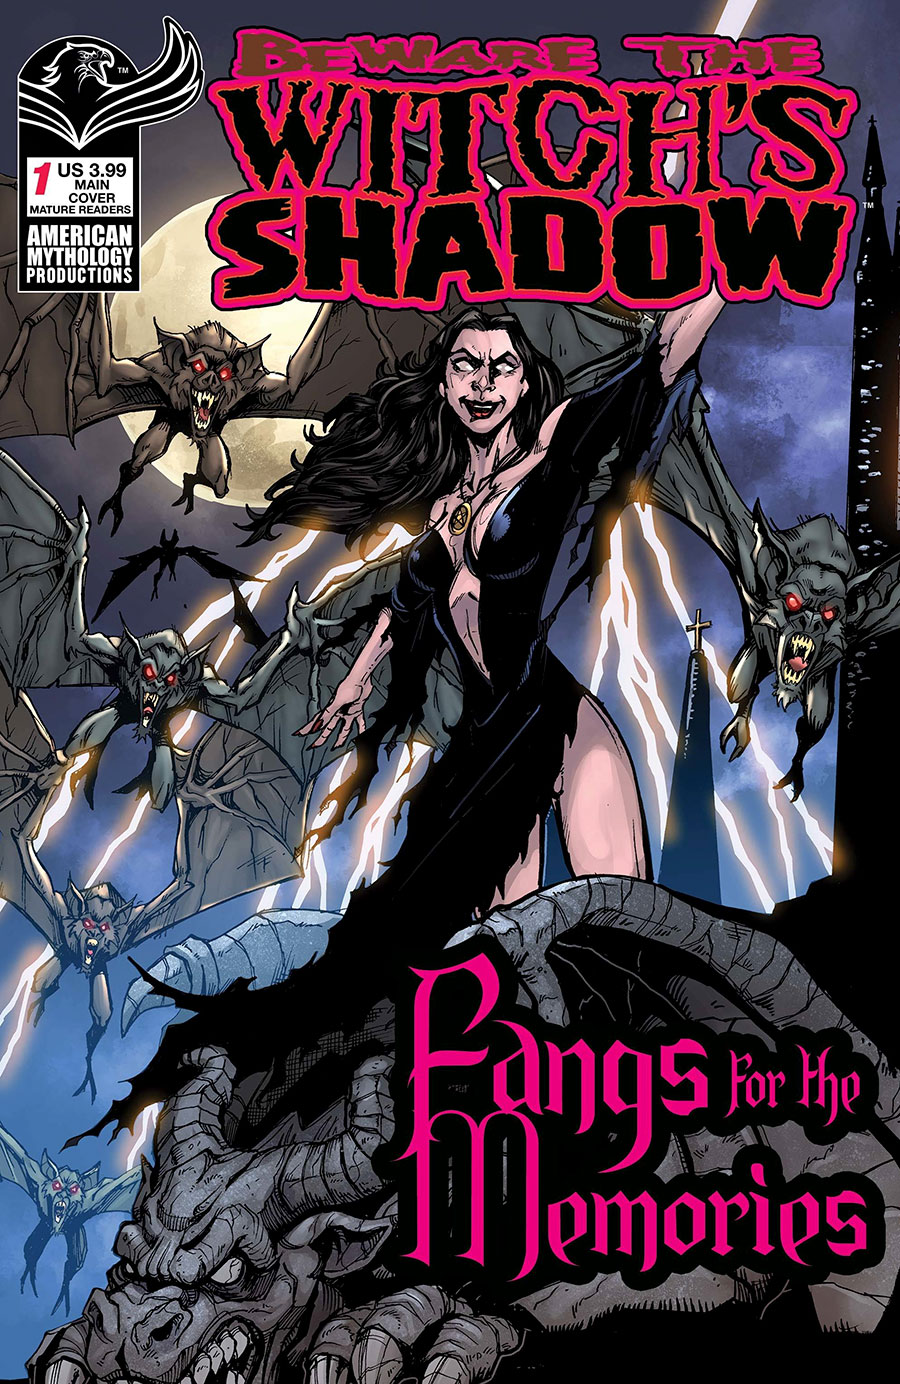 Beware The Witchs Shadow Fangs For The Memories #1 Cover A Regular Puis Calzada Cover